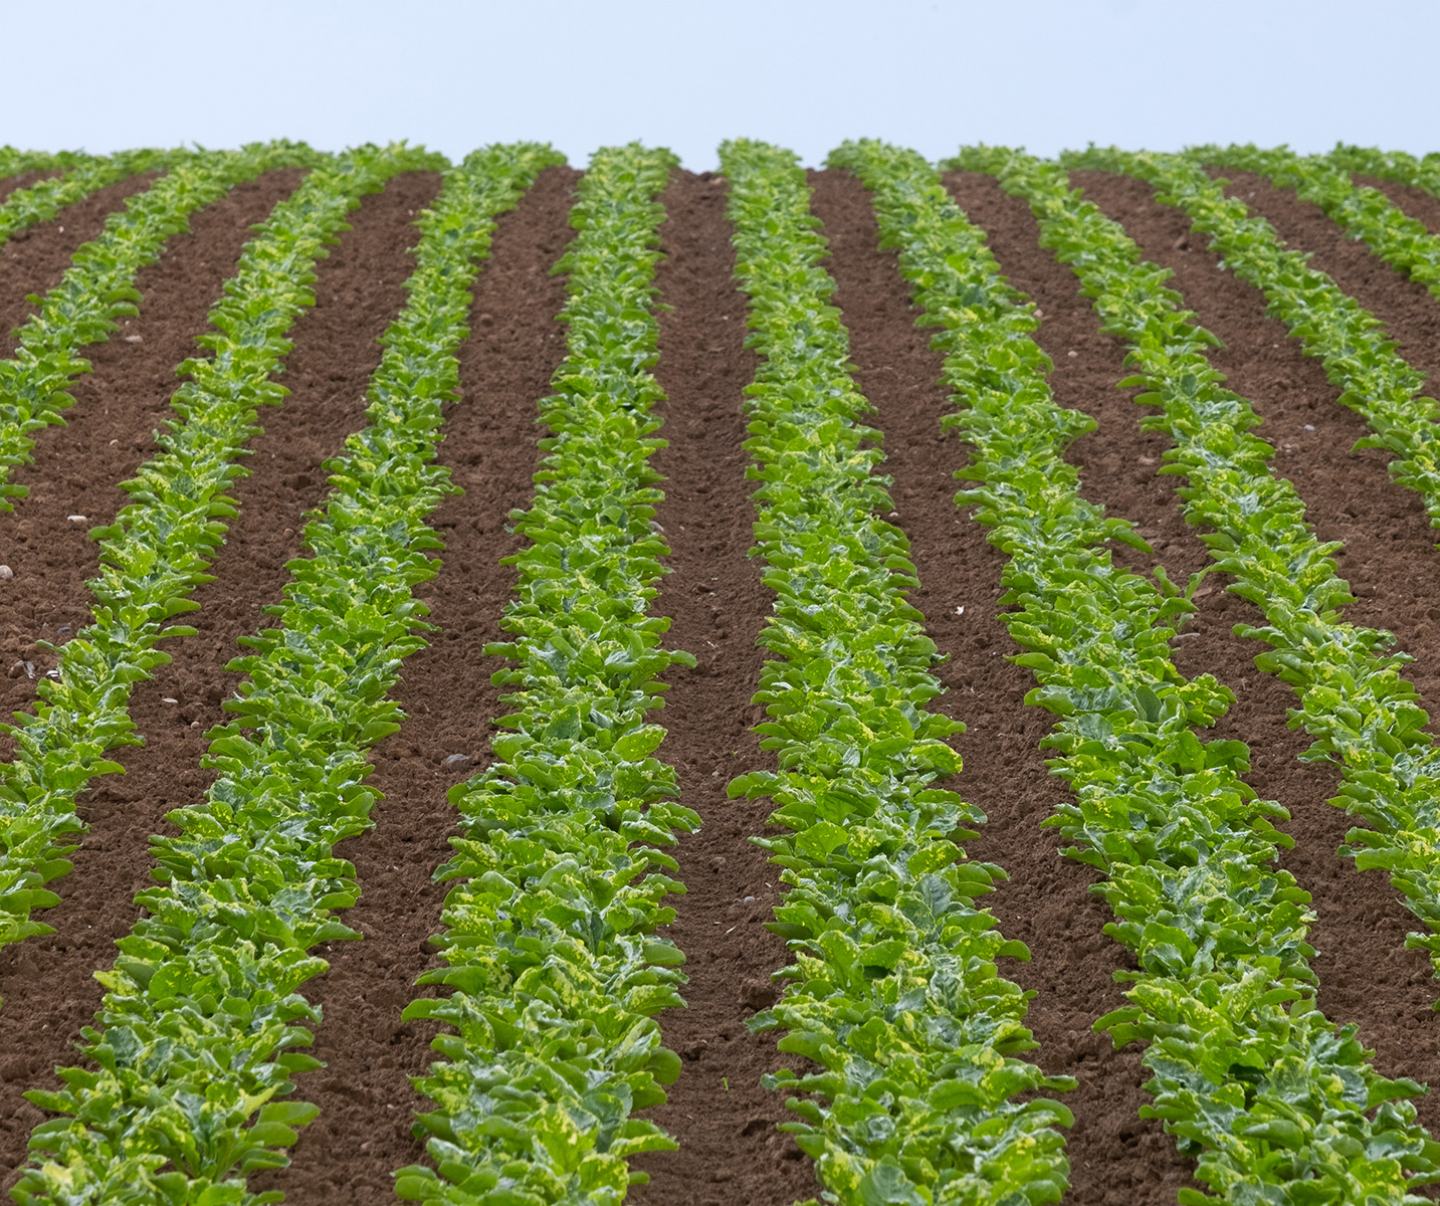 Rows of green crops